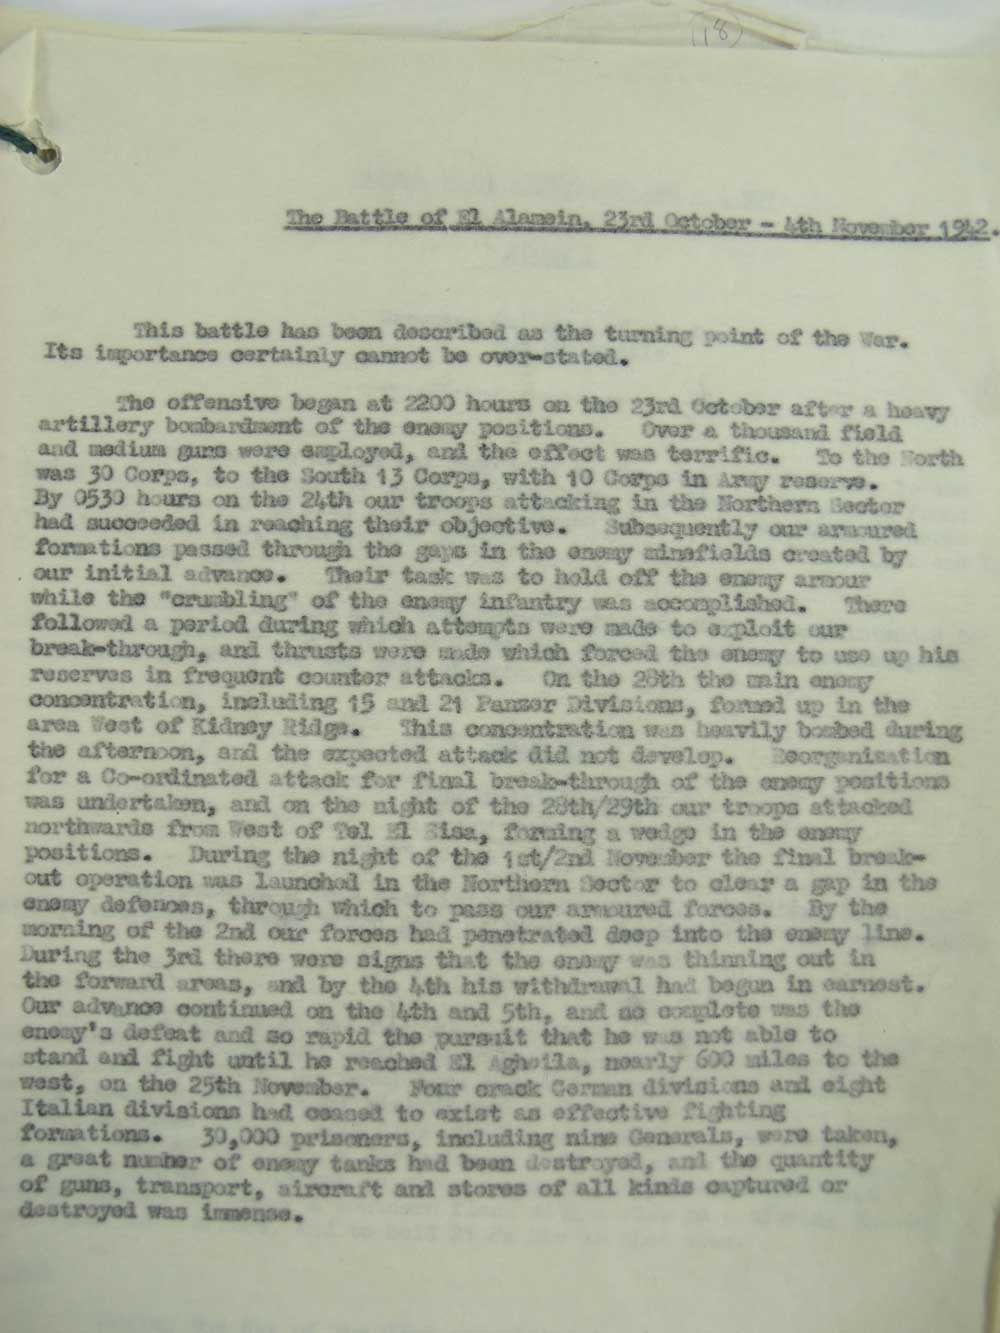 Quote and details of battle (catalogue reference: WO 106/2254)